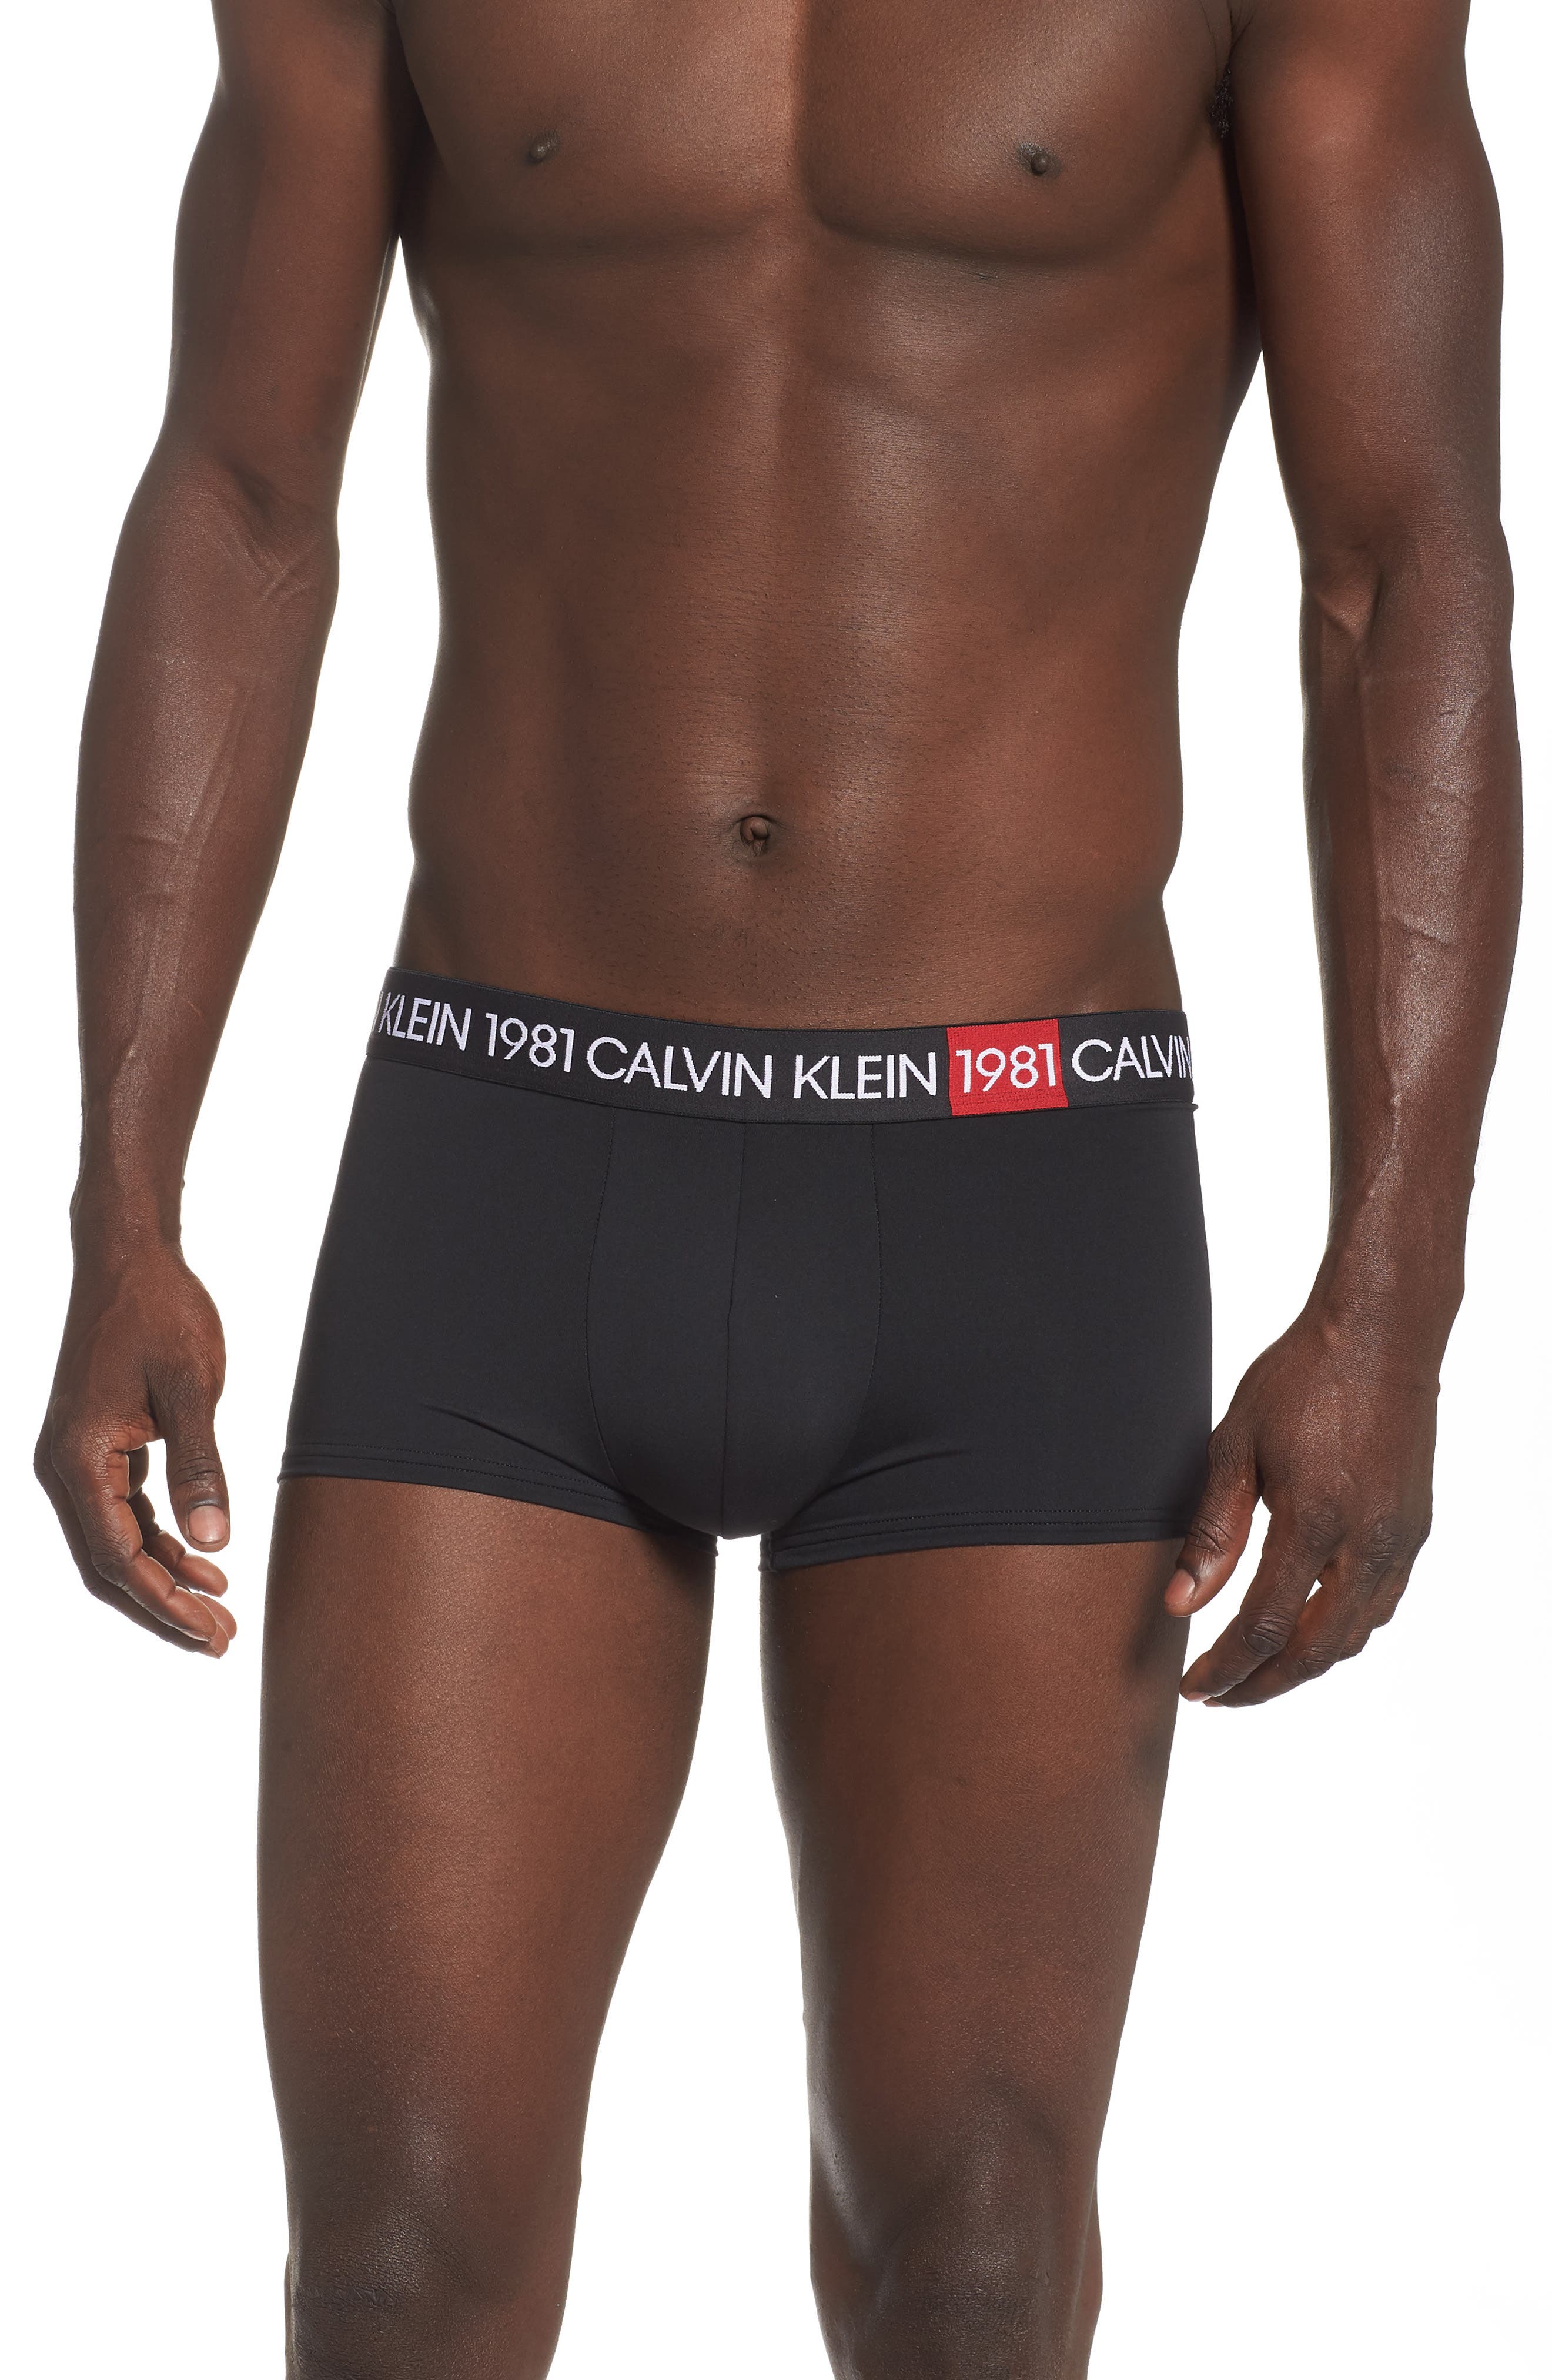 UPC 011531870819 product image for Men's Calvin Klein 1901 Low-Rise Trunks, Size Small - Black | upcitemdb.com